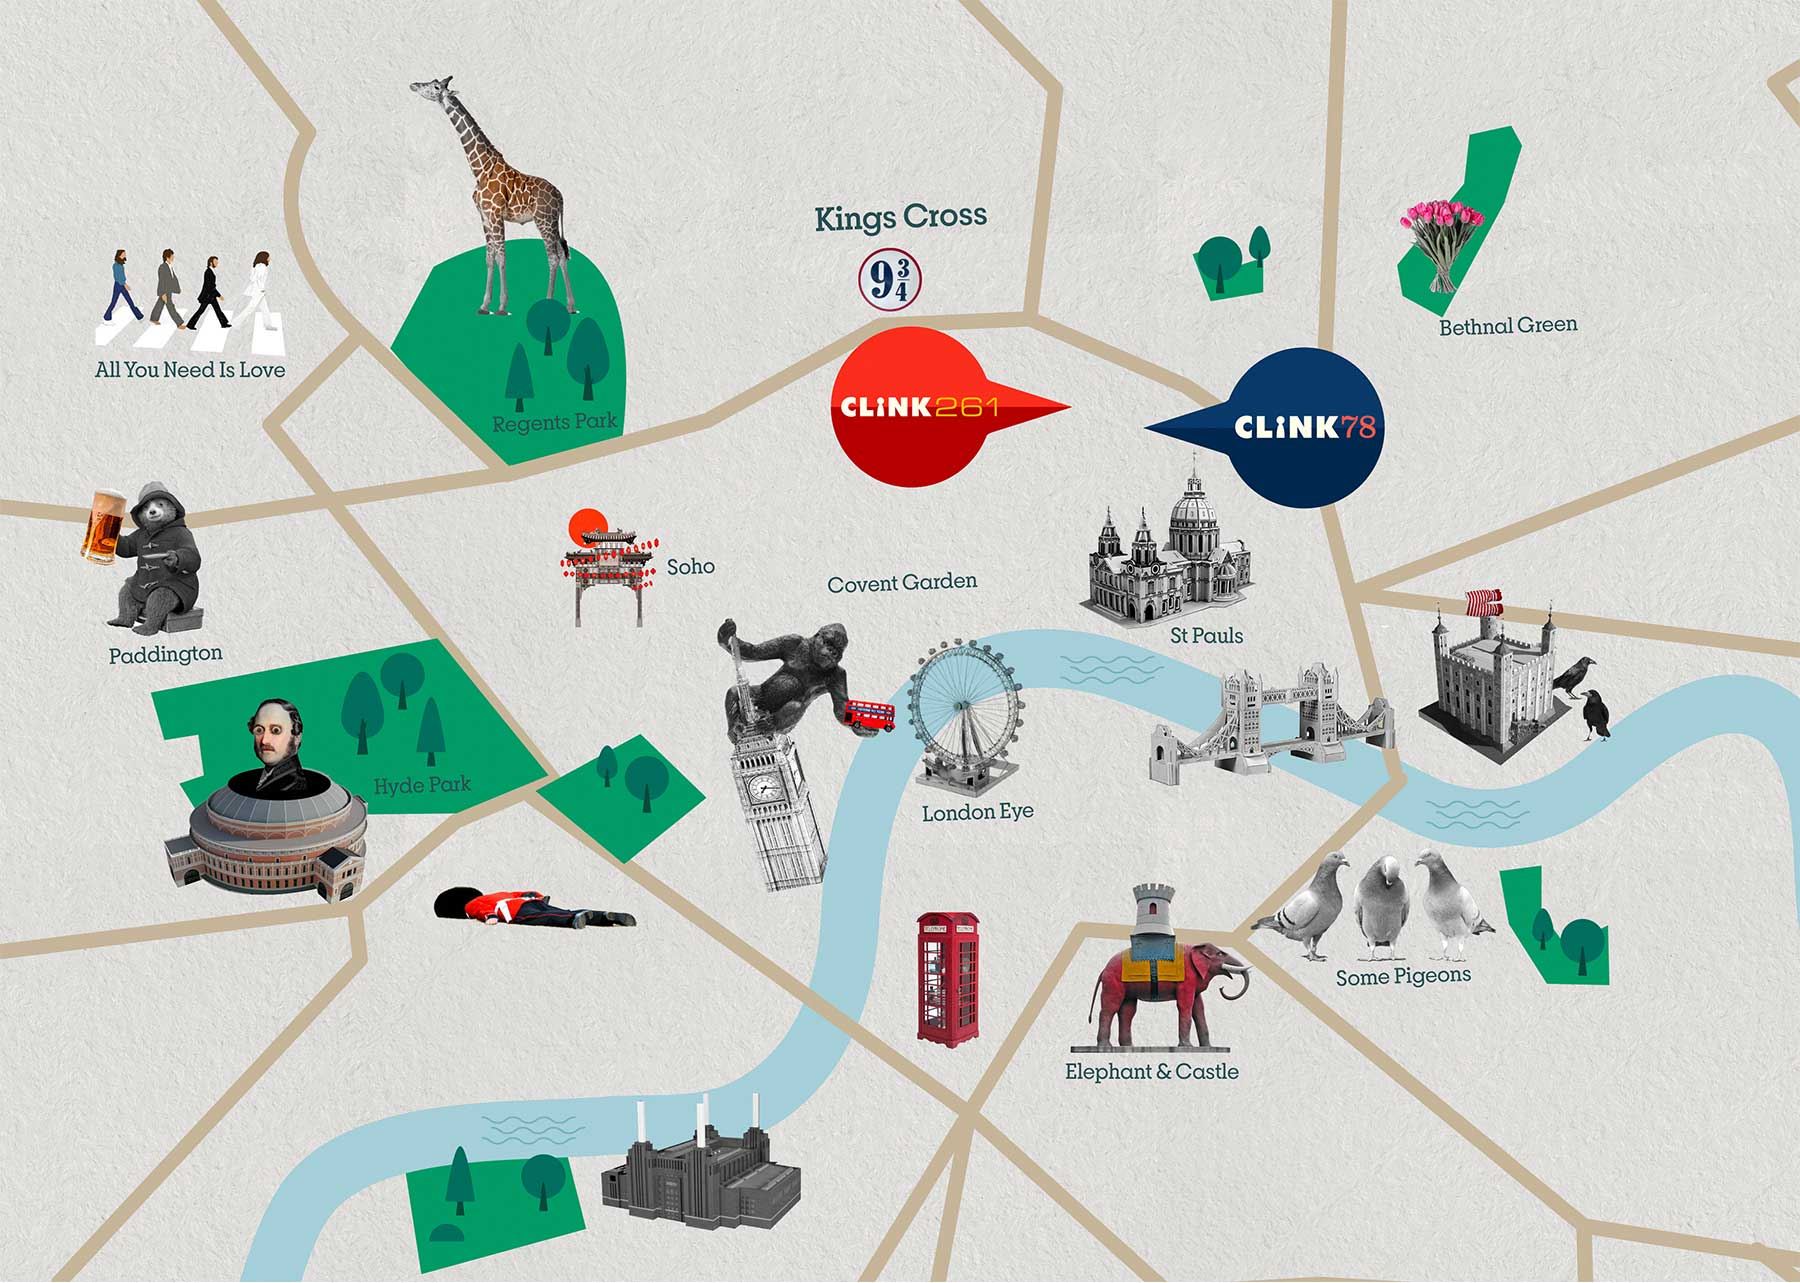 London City's attractions, along with Clink 261 and Clink 78 on the map